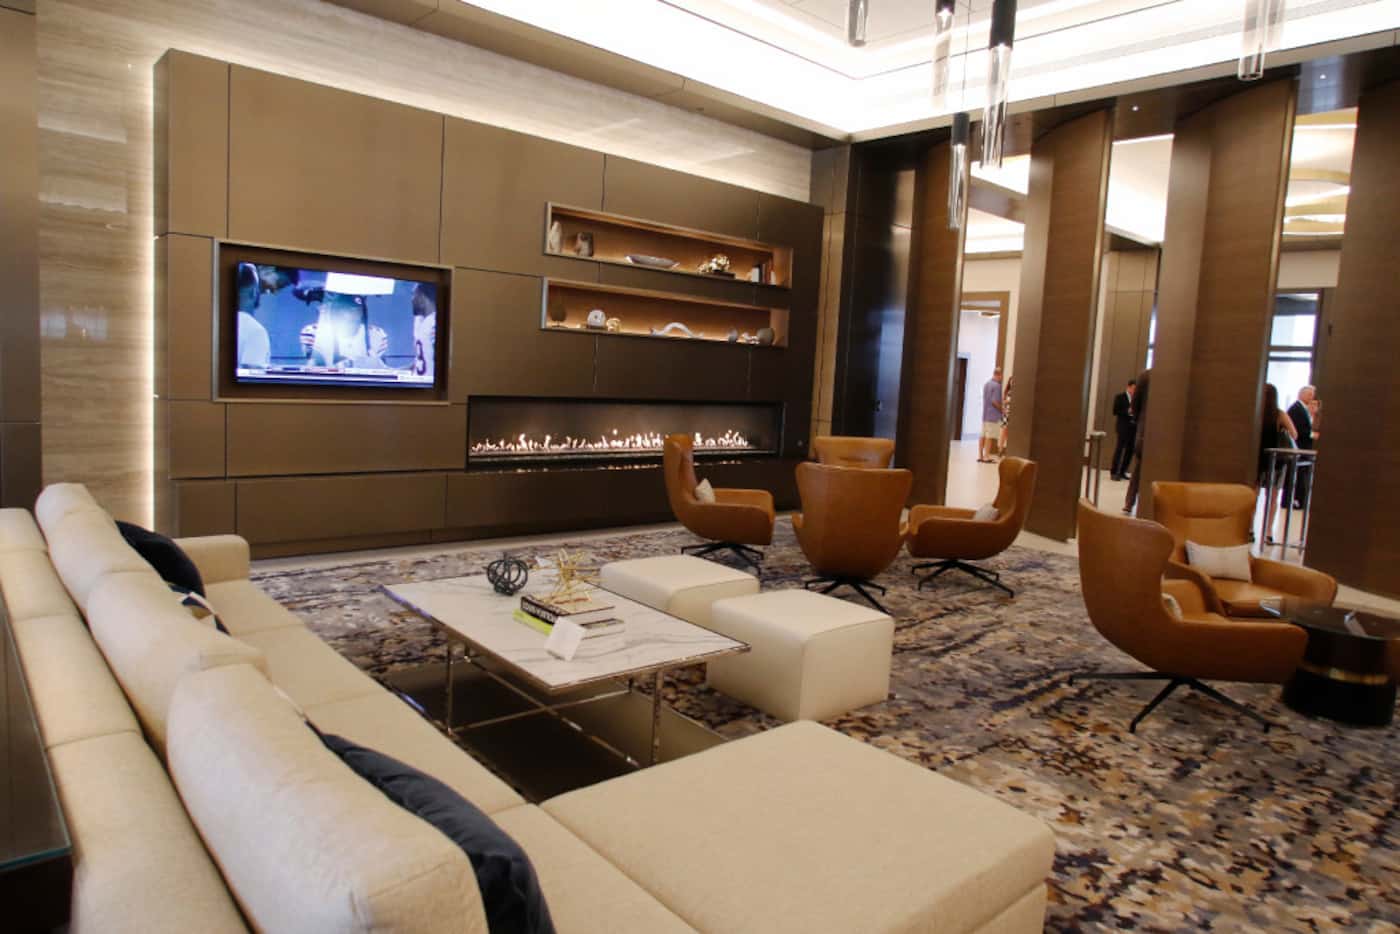 One of the lounge areas for guest located in the lobby at the Omni Frisco Hotel at The Star...